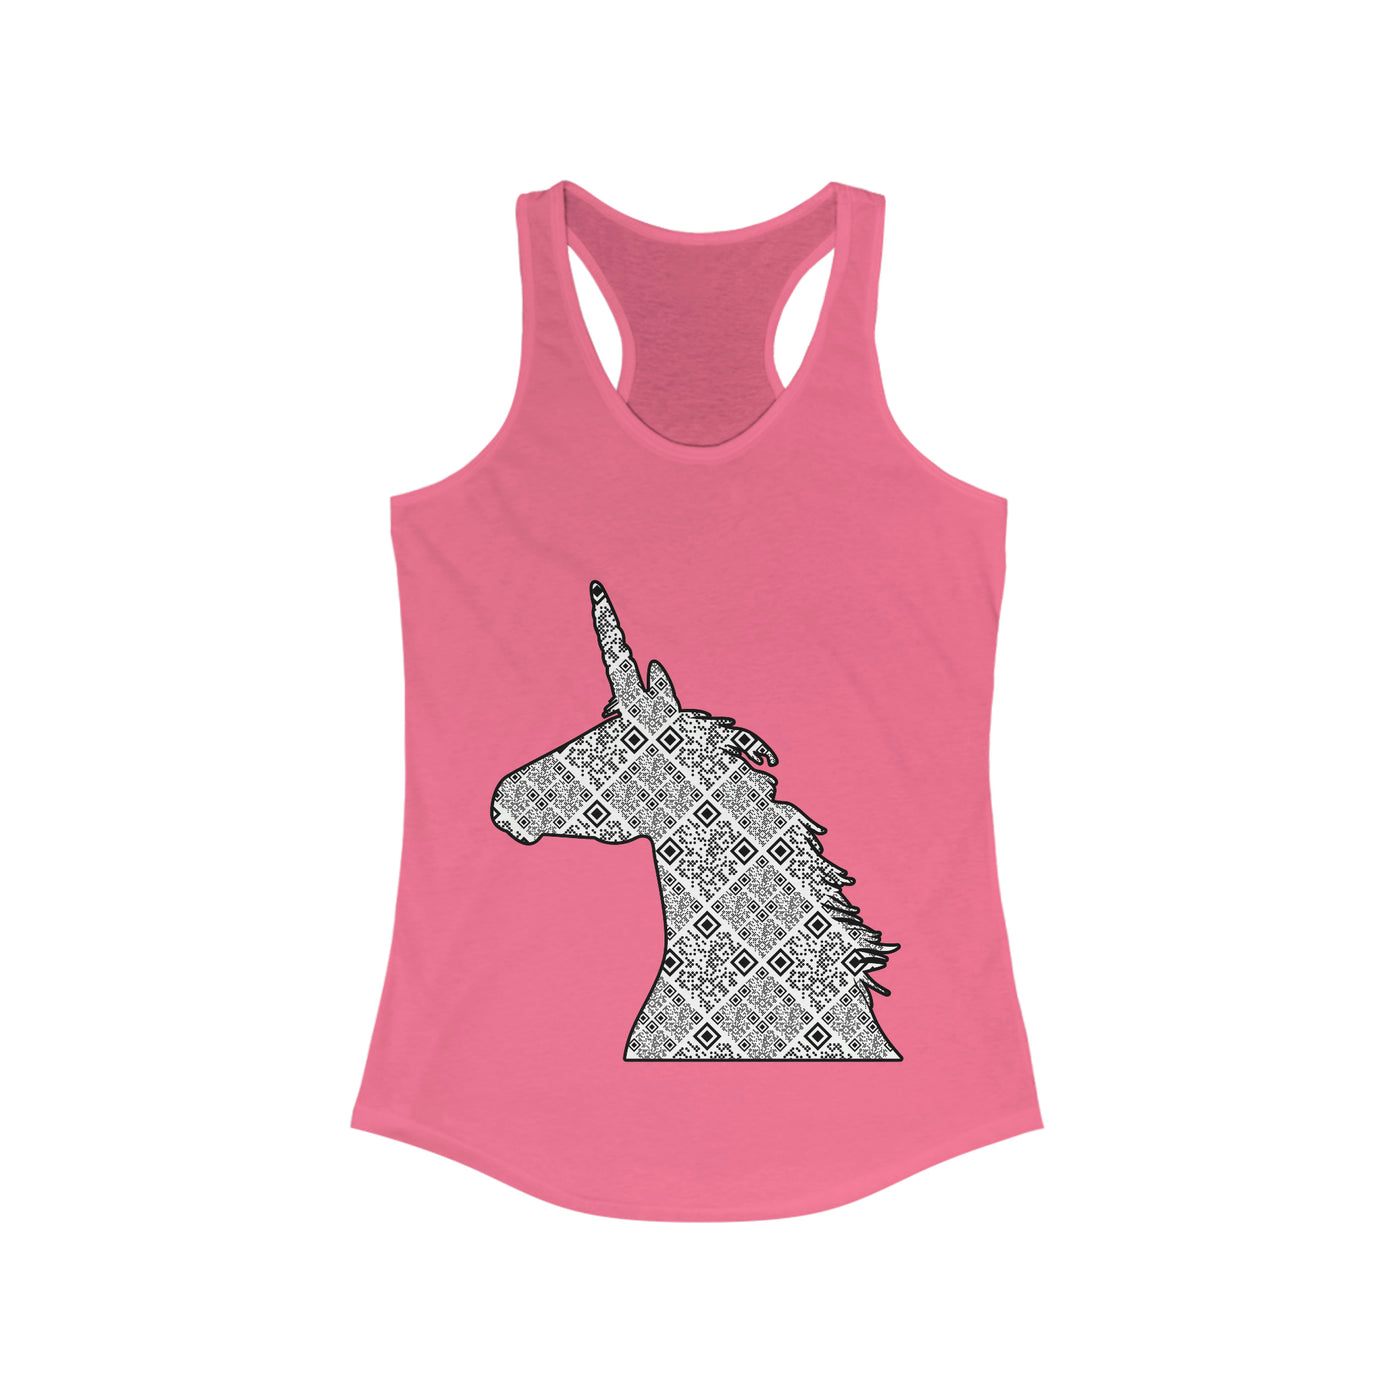 XR Reality Collection: Mystical Unicorn (Women's) Adult Racerback Tank Top